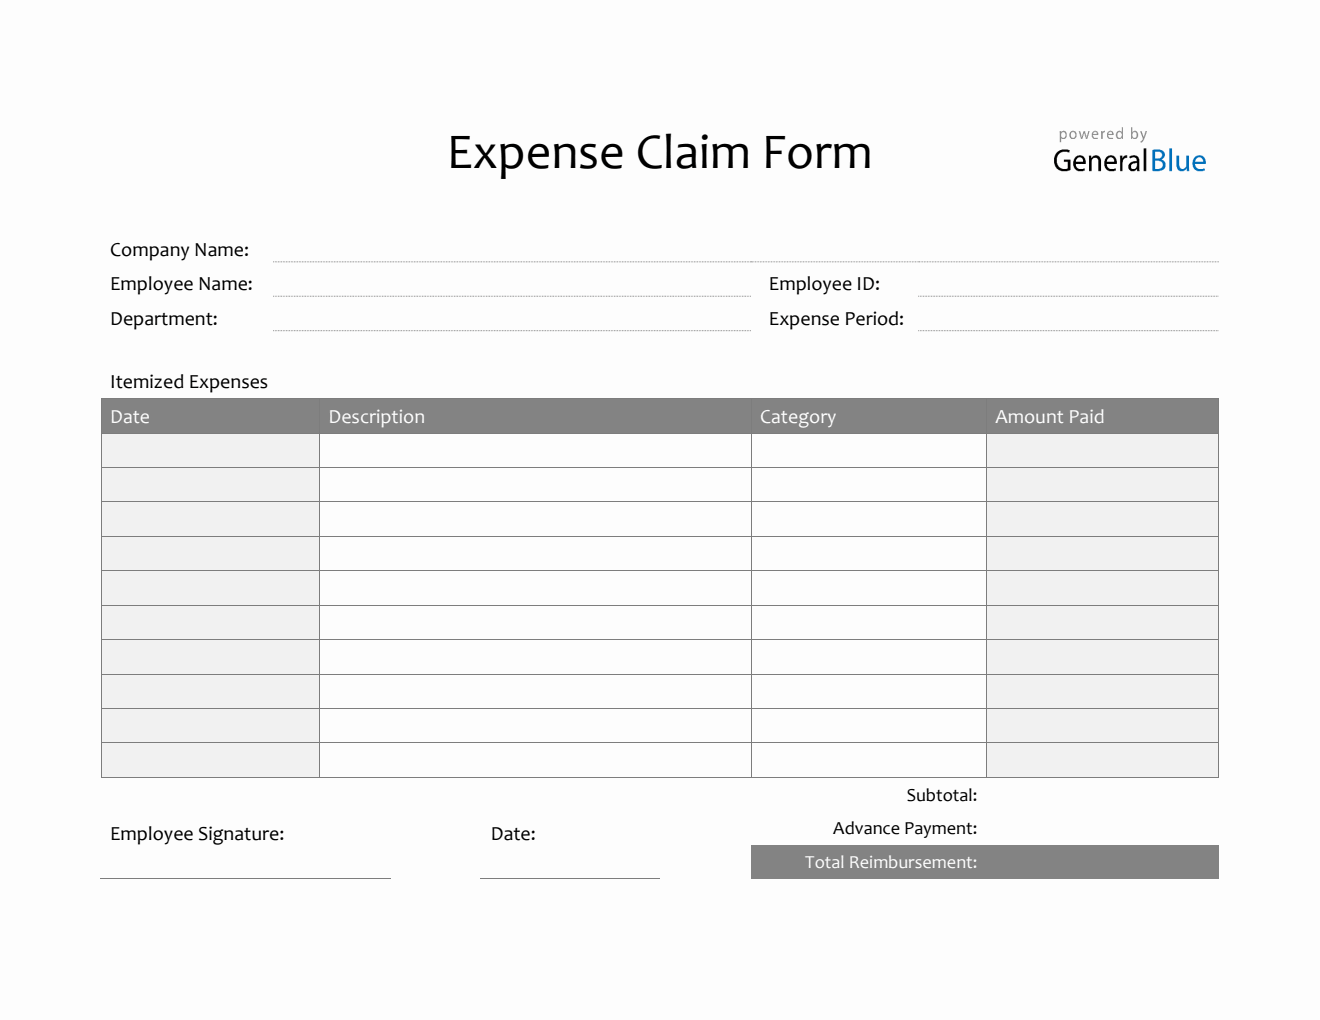 Expense Claim Form in Word (Simple)